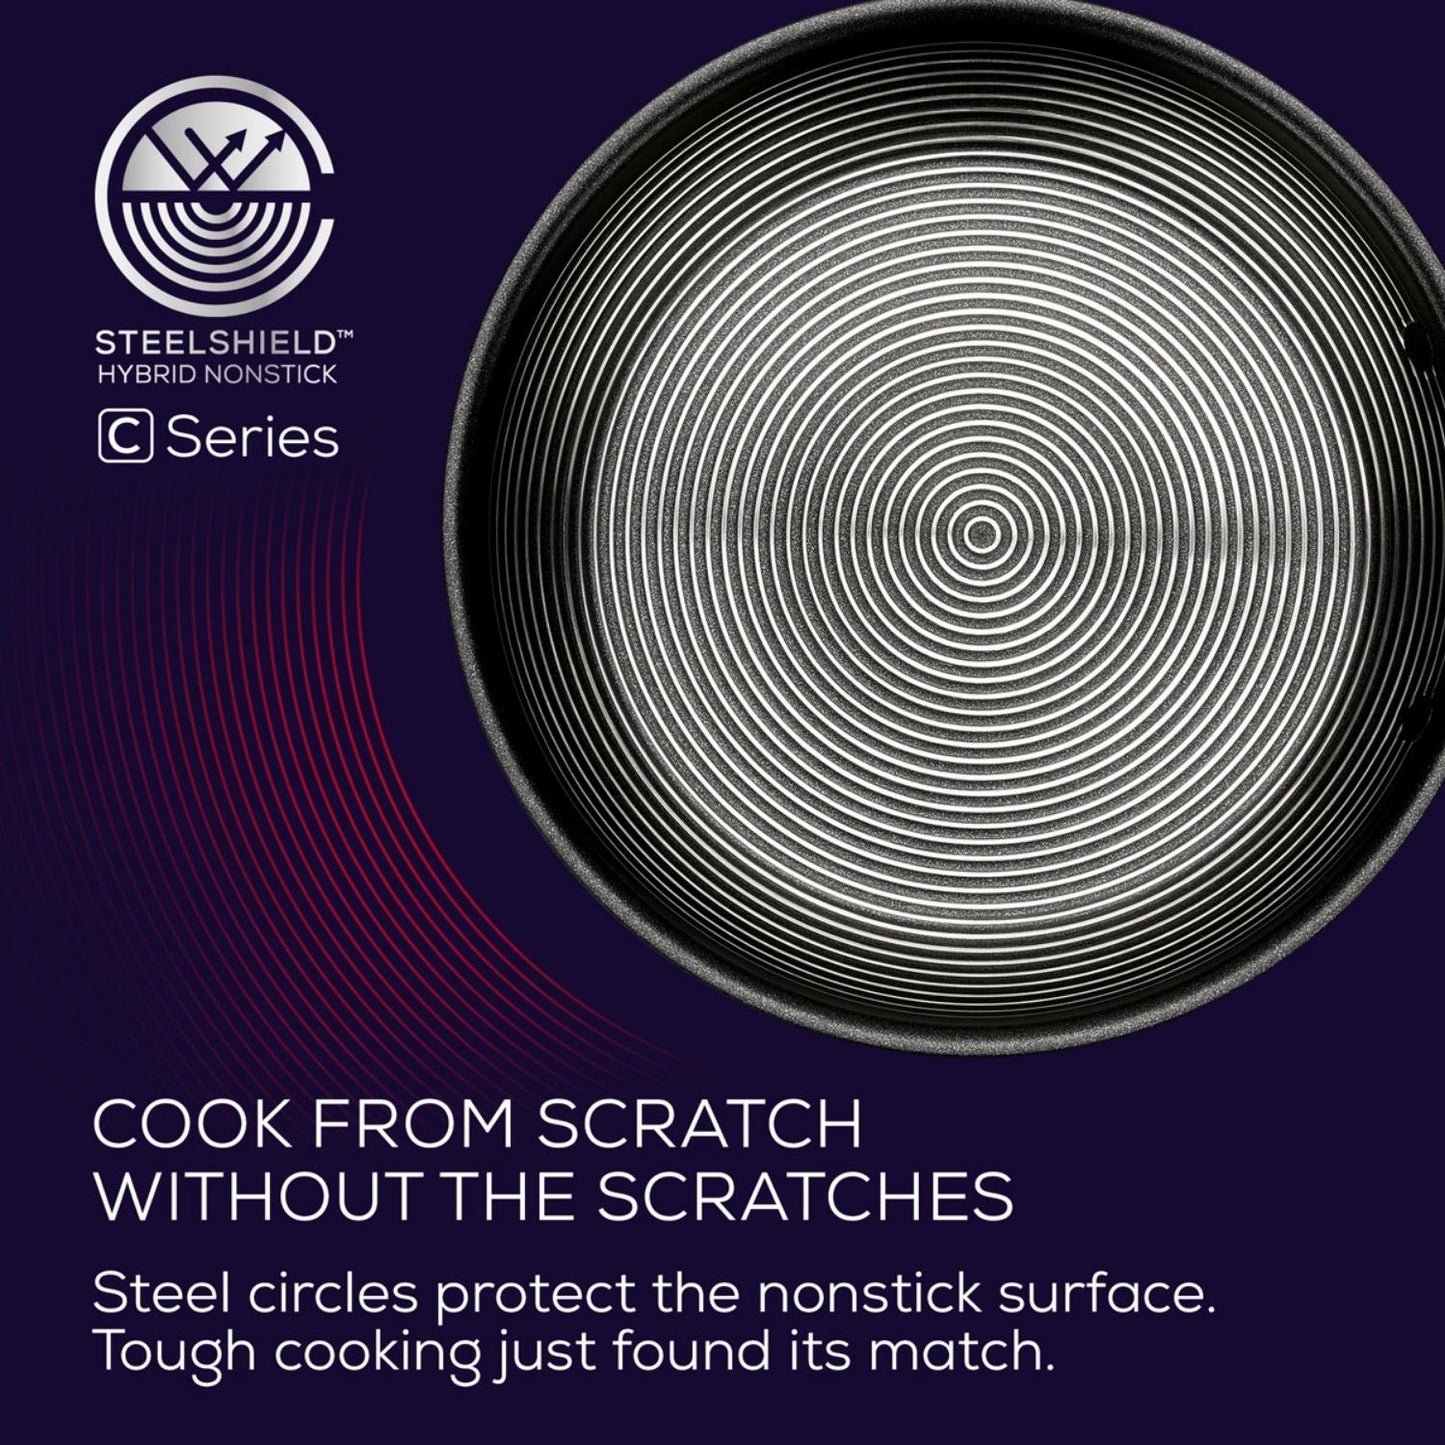 Circulon C-Series Nonstick Clad Stainless Steel Induction Stockpot 26cm